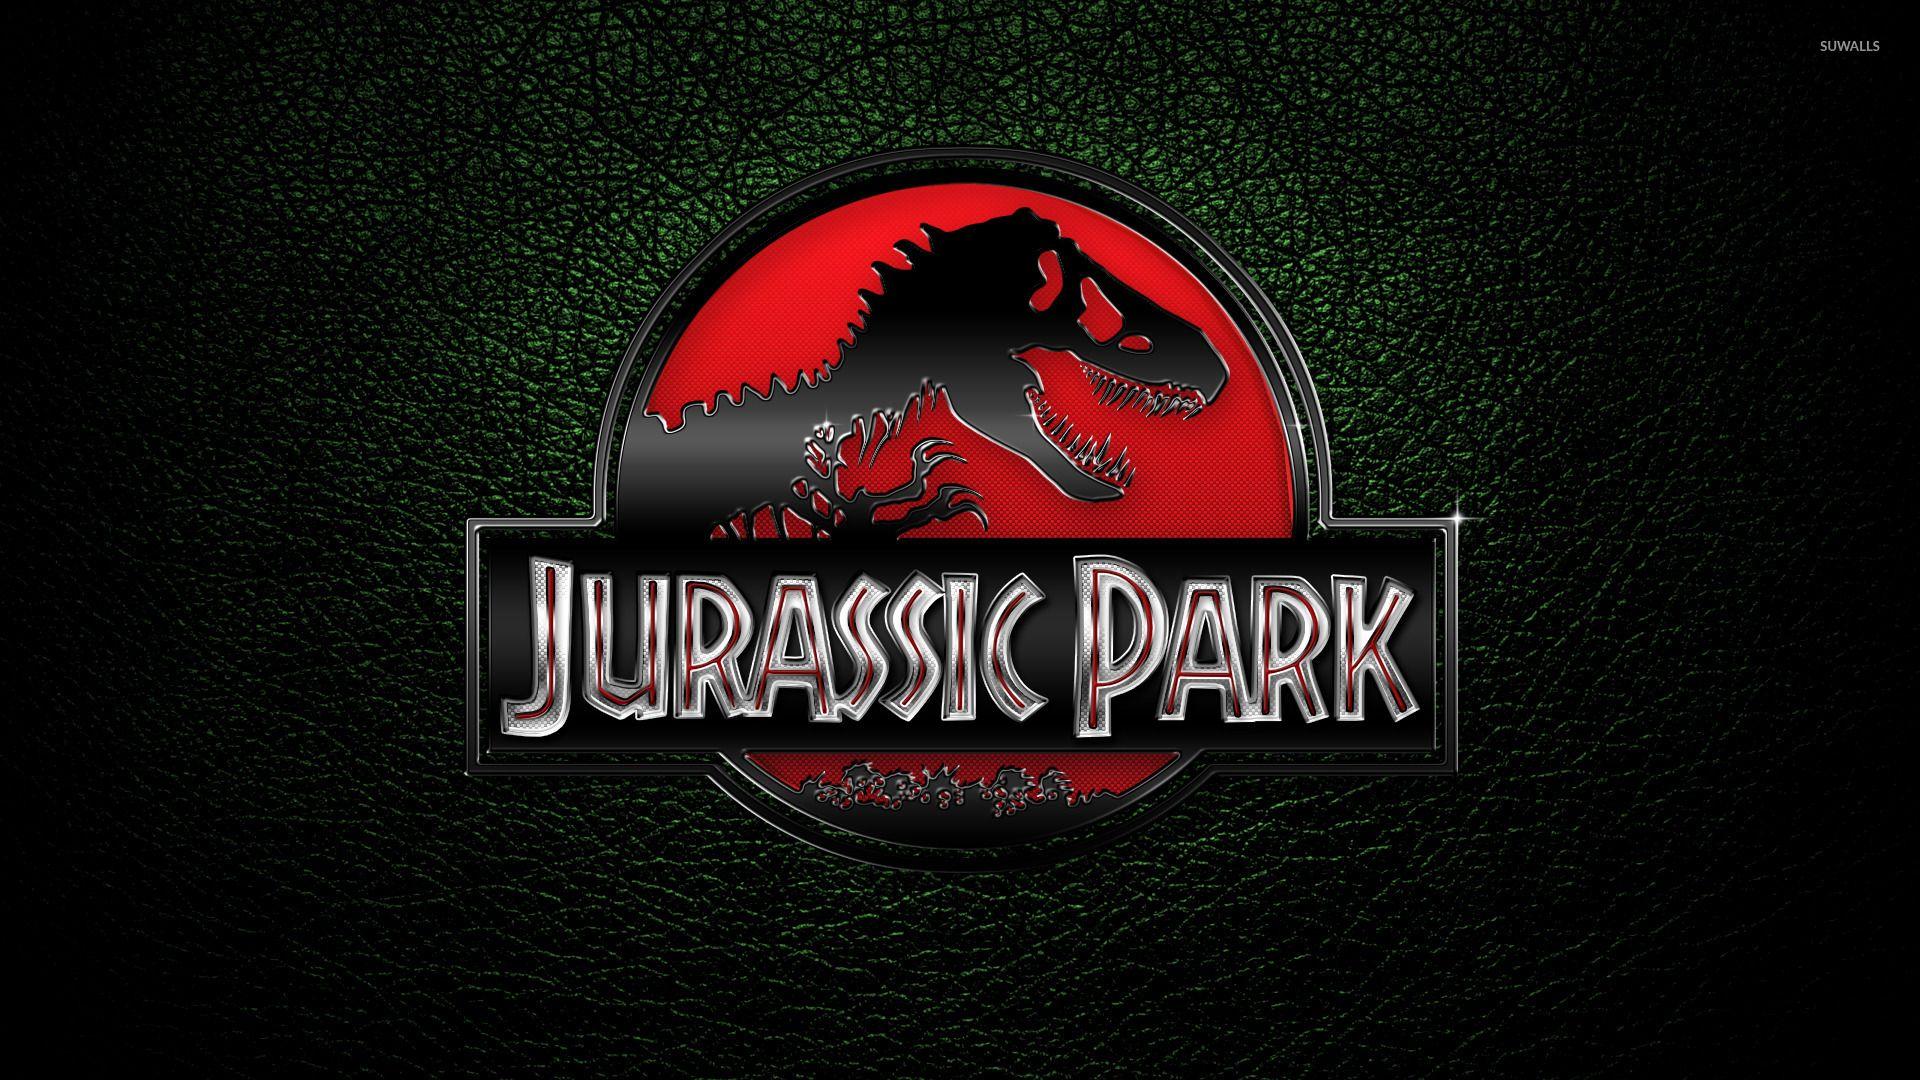 Jurassic Park 2 Wallpapers Top Free Jurassic Park 2 Backgrounds 